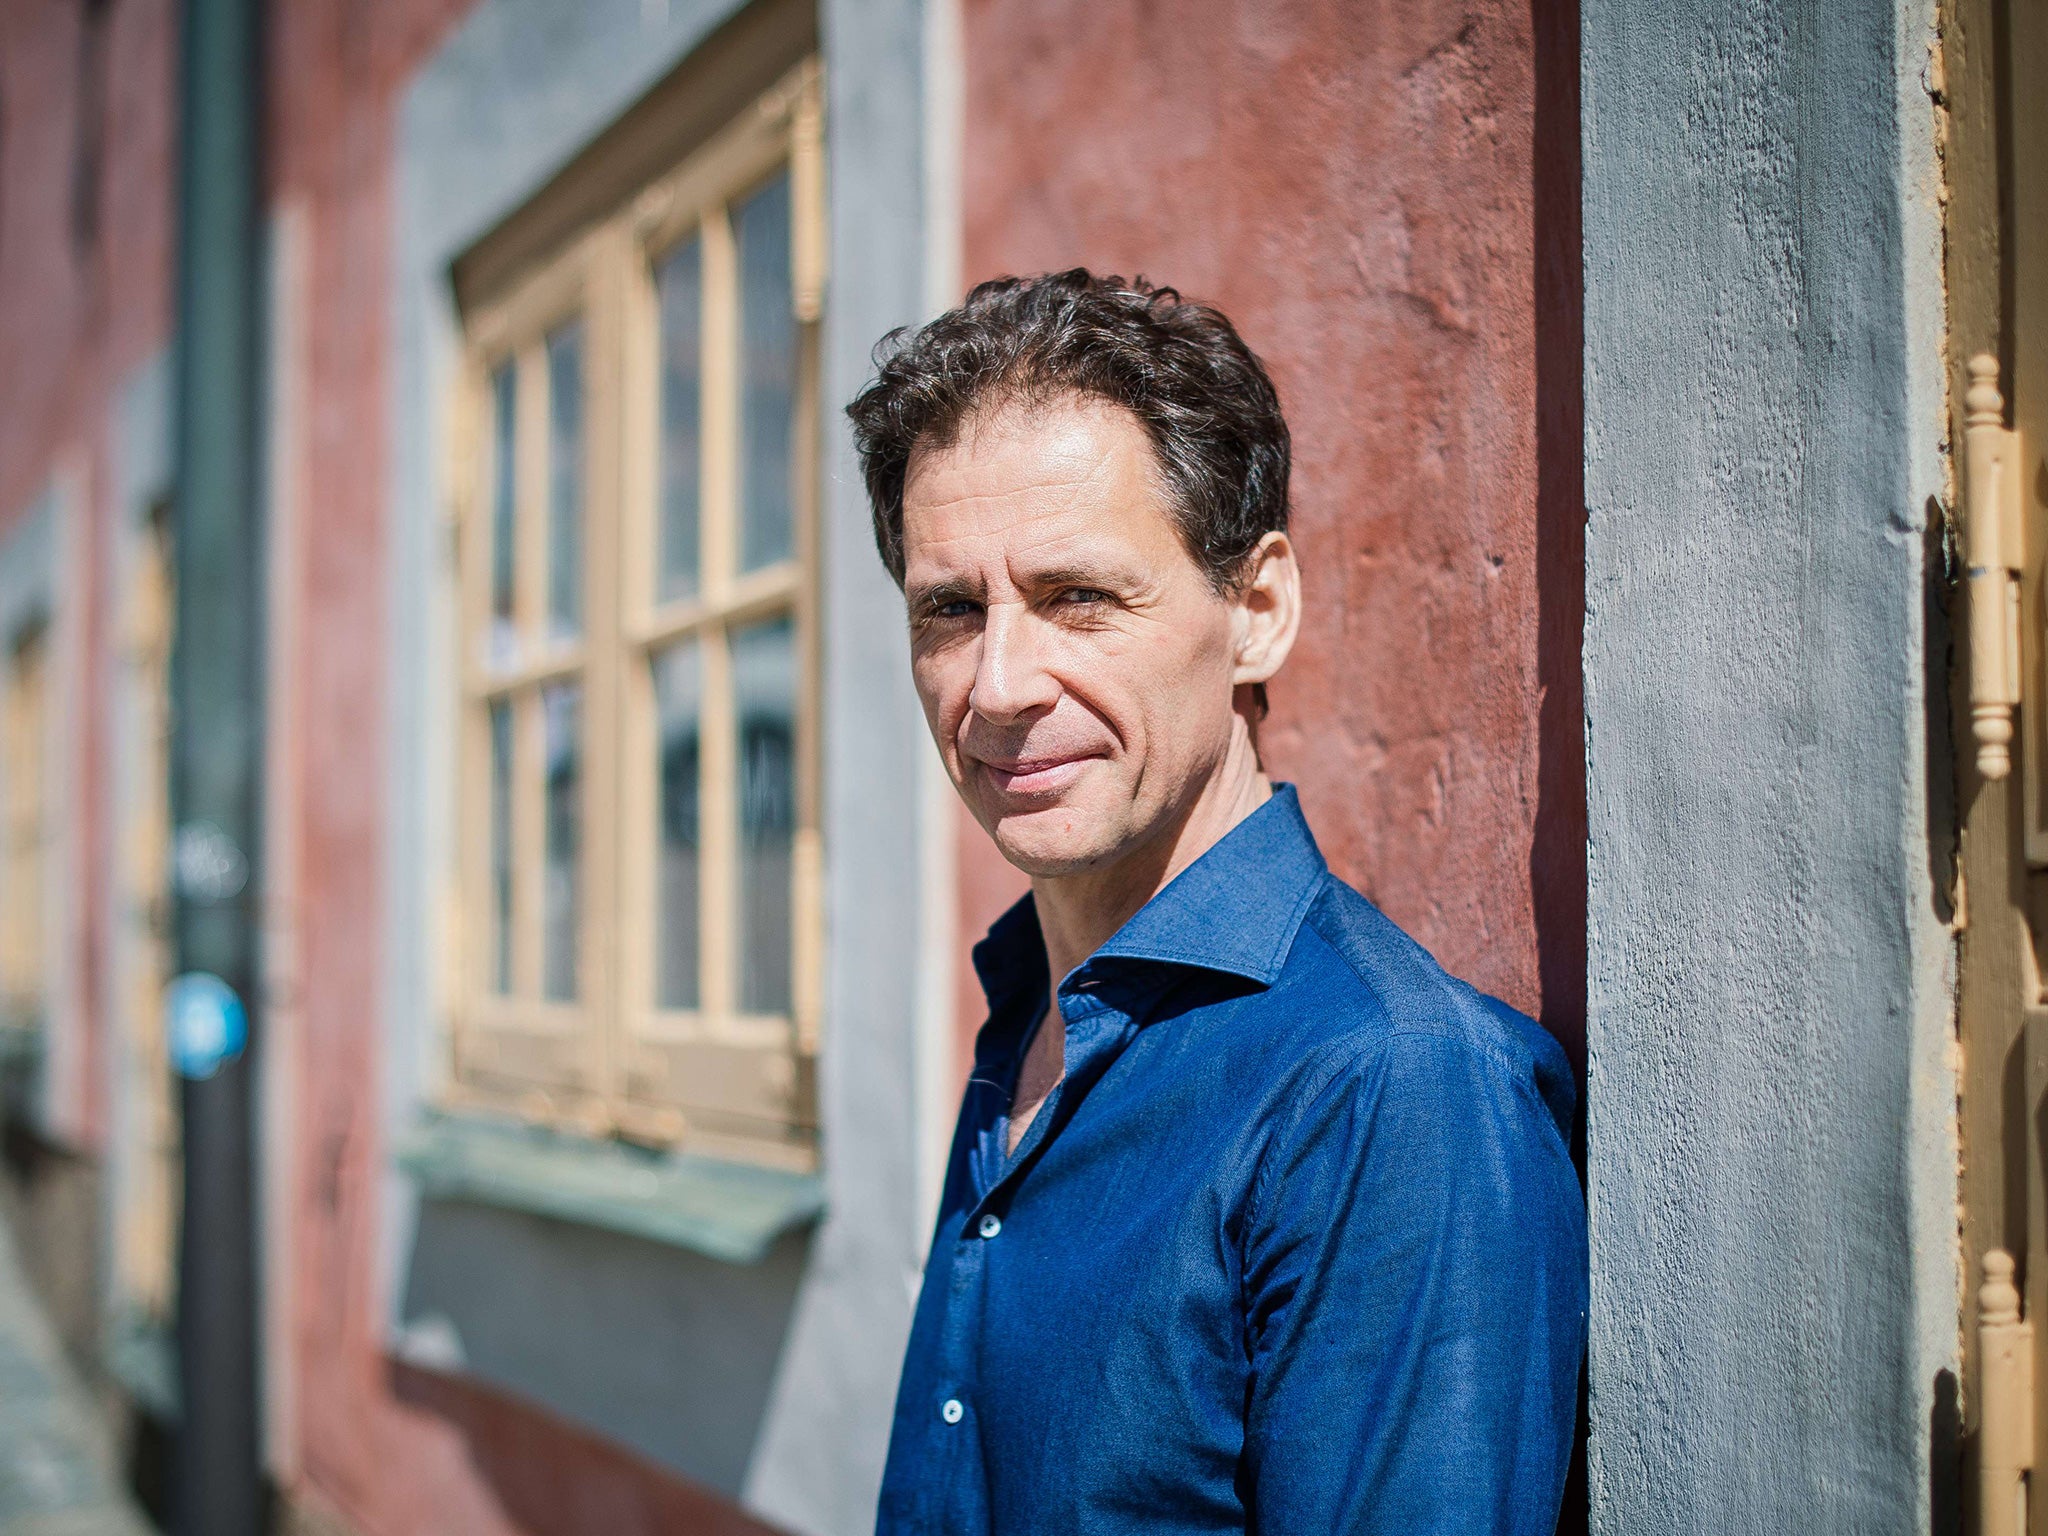 Best-selling Swedish author and journalist David Lagercrantz, who has written the next instalment in the ‘Millennium’ series